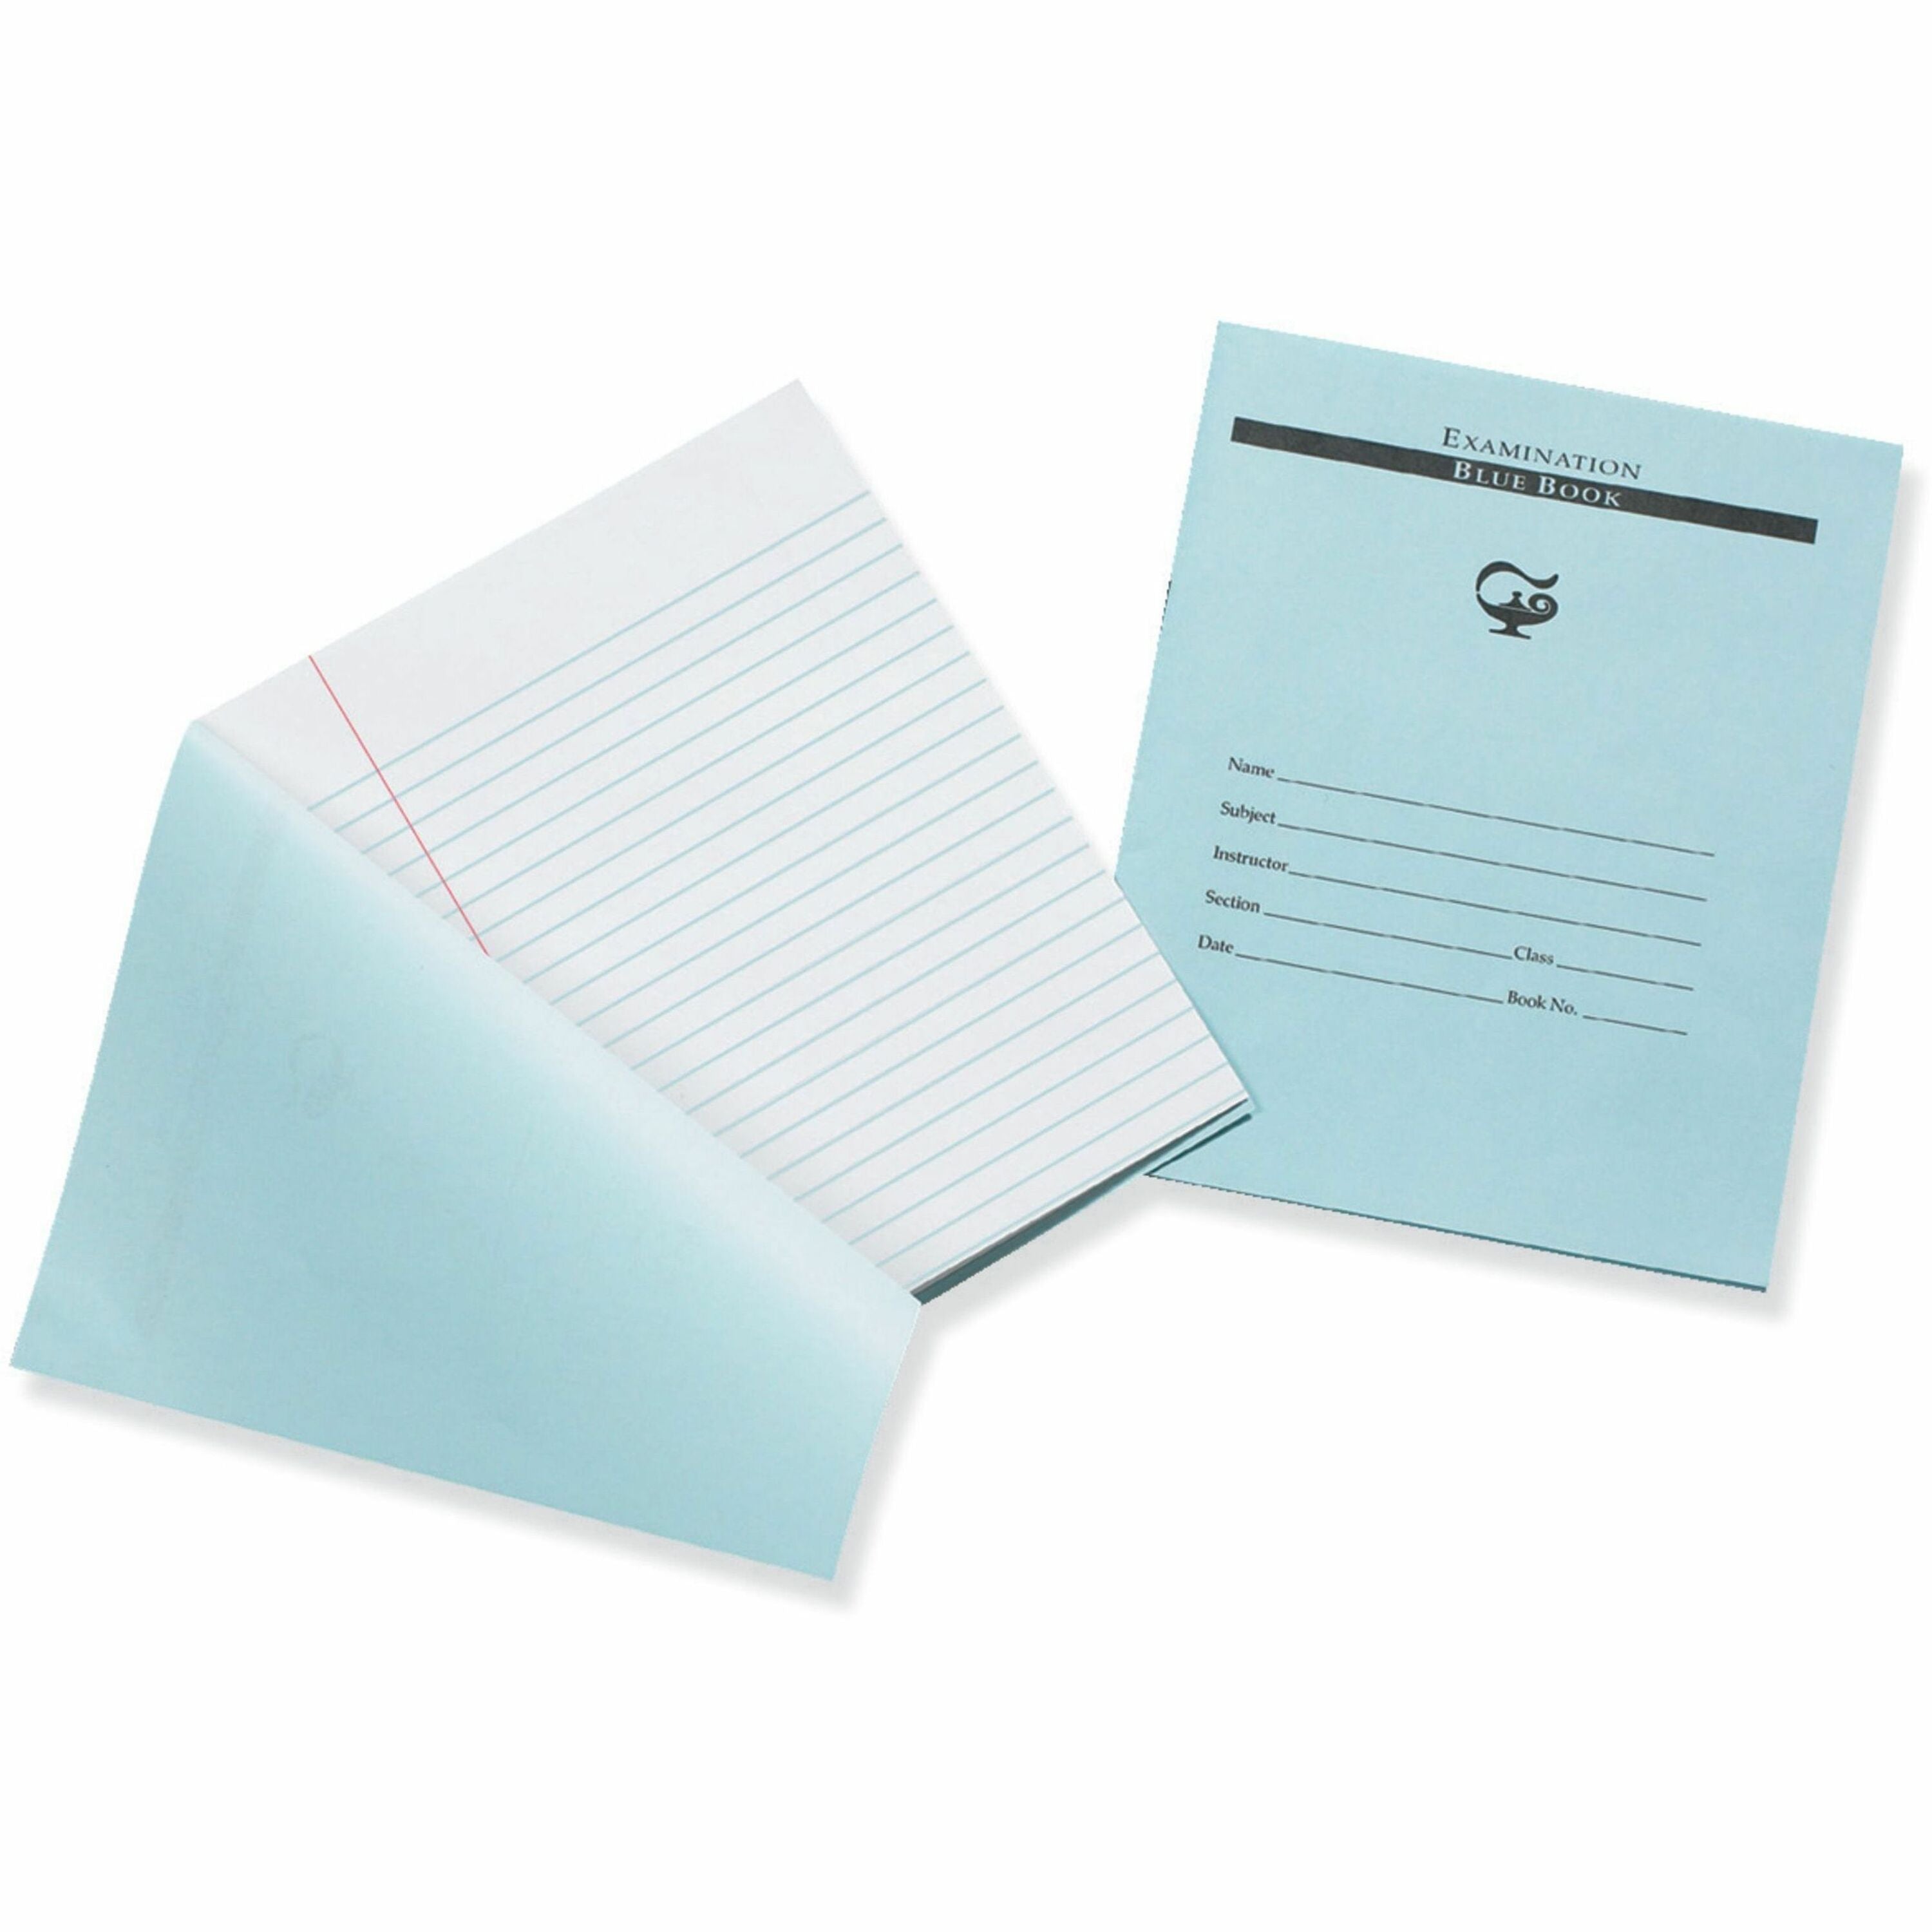 Pacon Blue Book Examination Book - 8 Sheets - 0.38" Ruled - Red Margin - 7" x 8 1/2" - White Paper - Blue Cover - Bond Paper - Recycled - 1000 / Carton - 